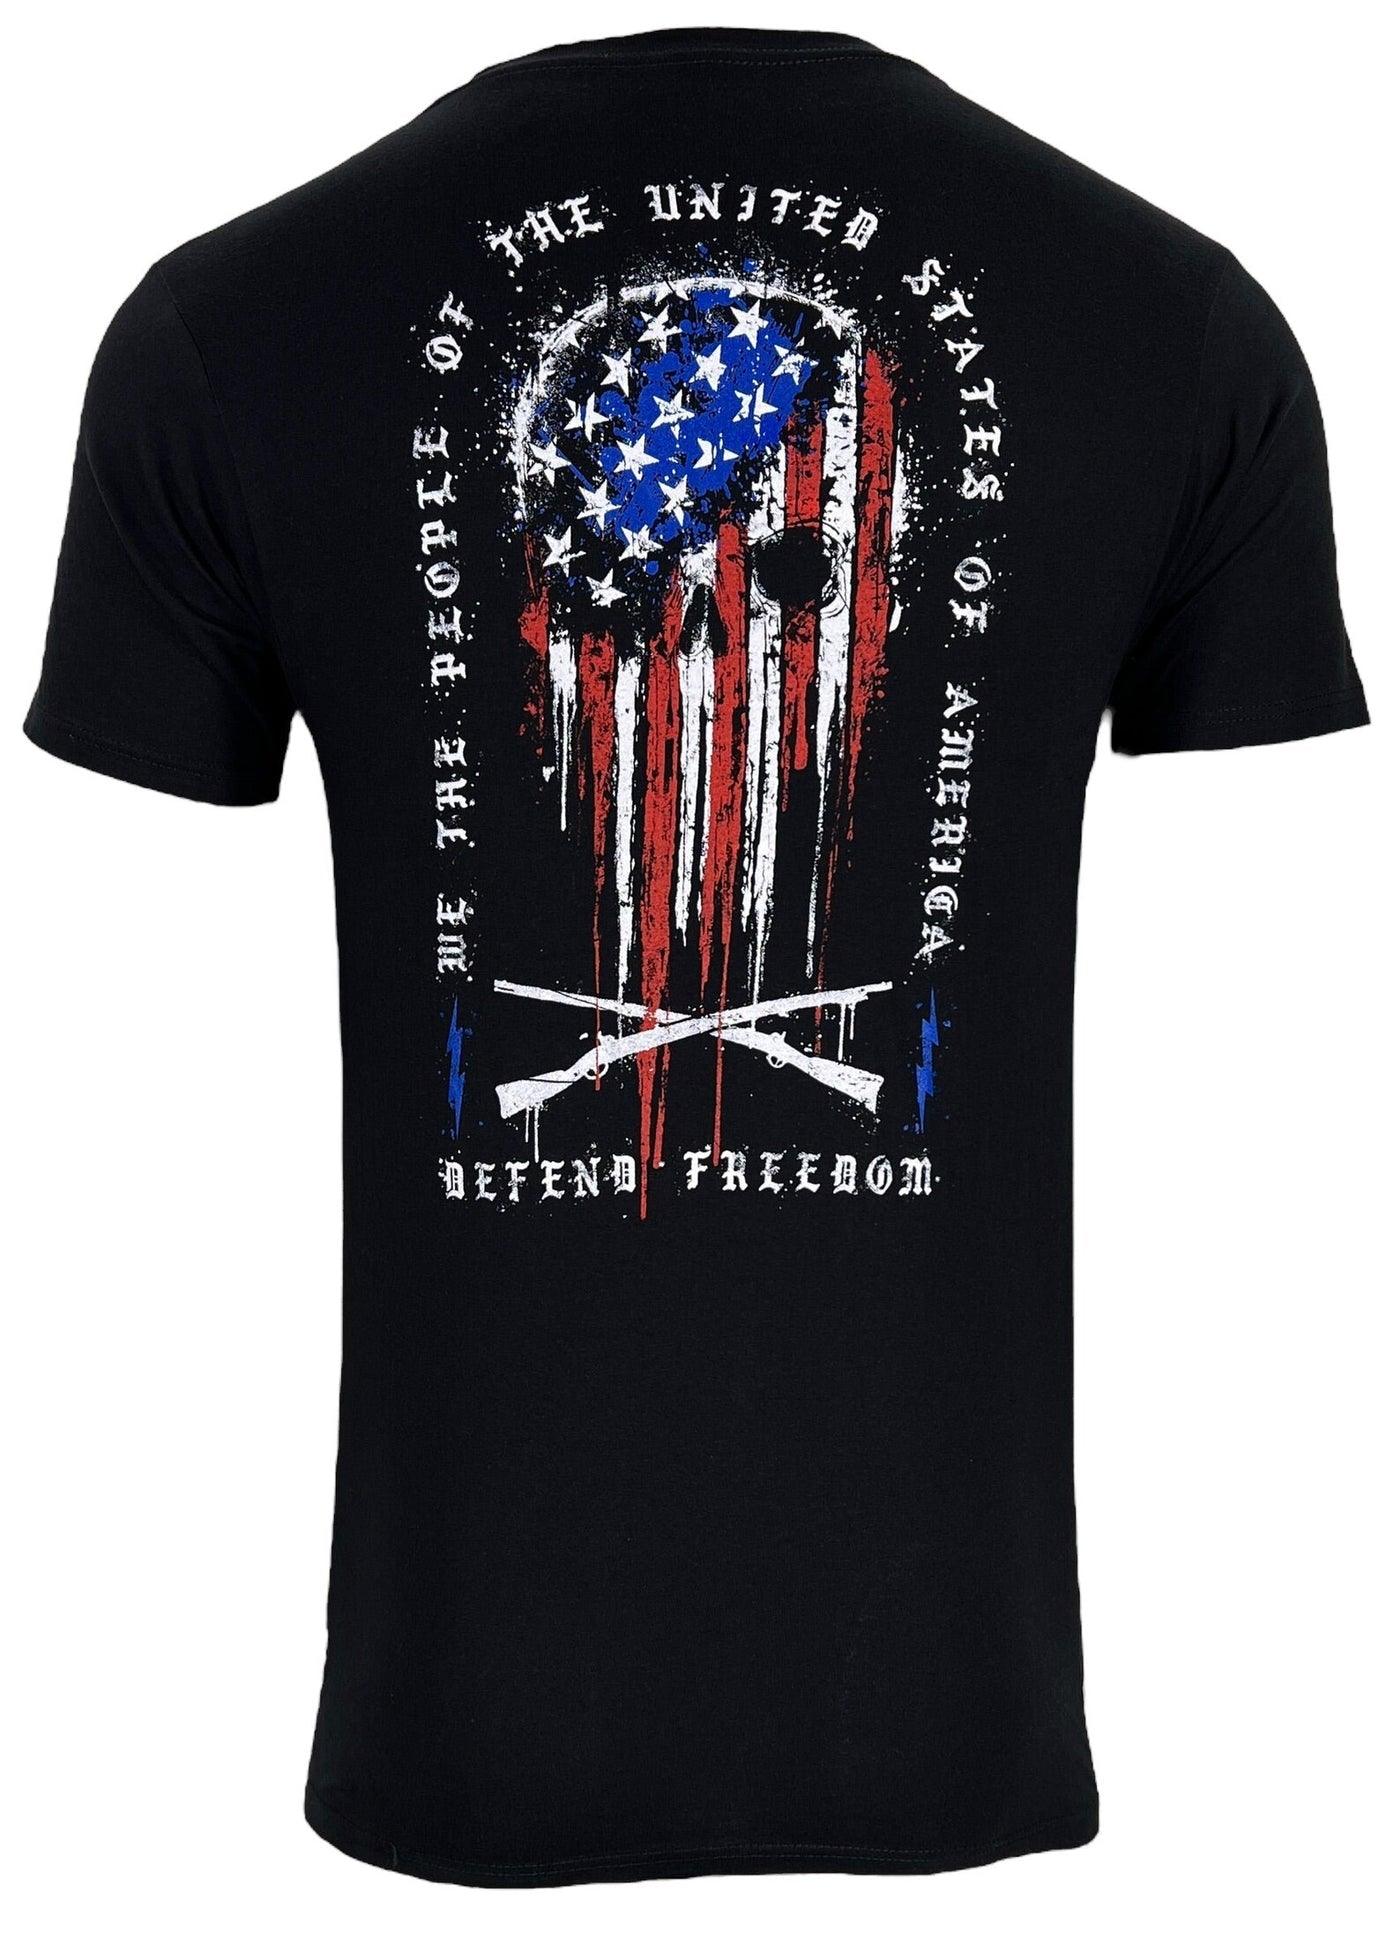 Defender T-shirt - Black - Purpose-Built / Home of the Trades